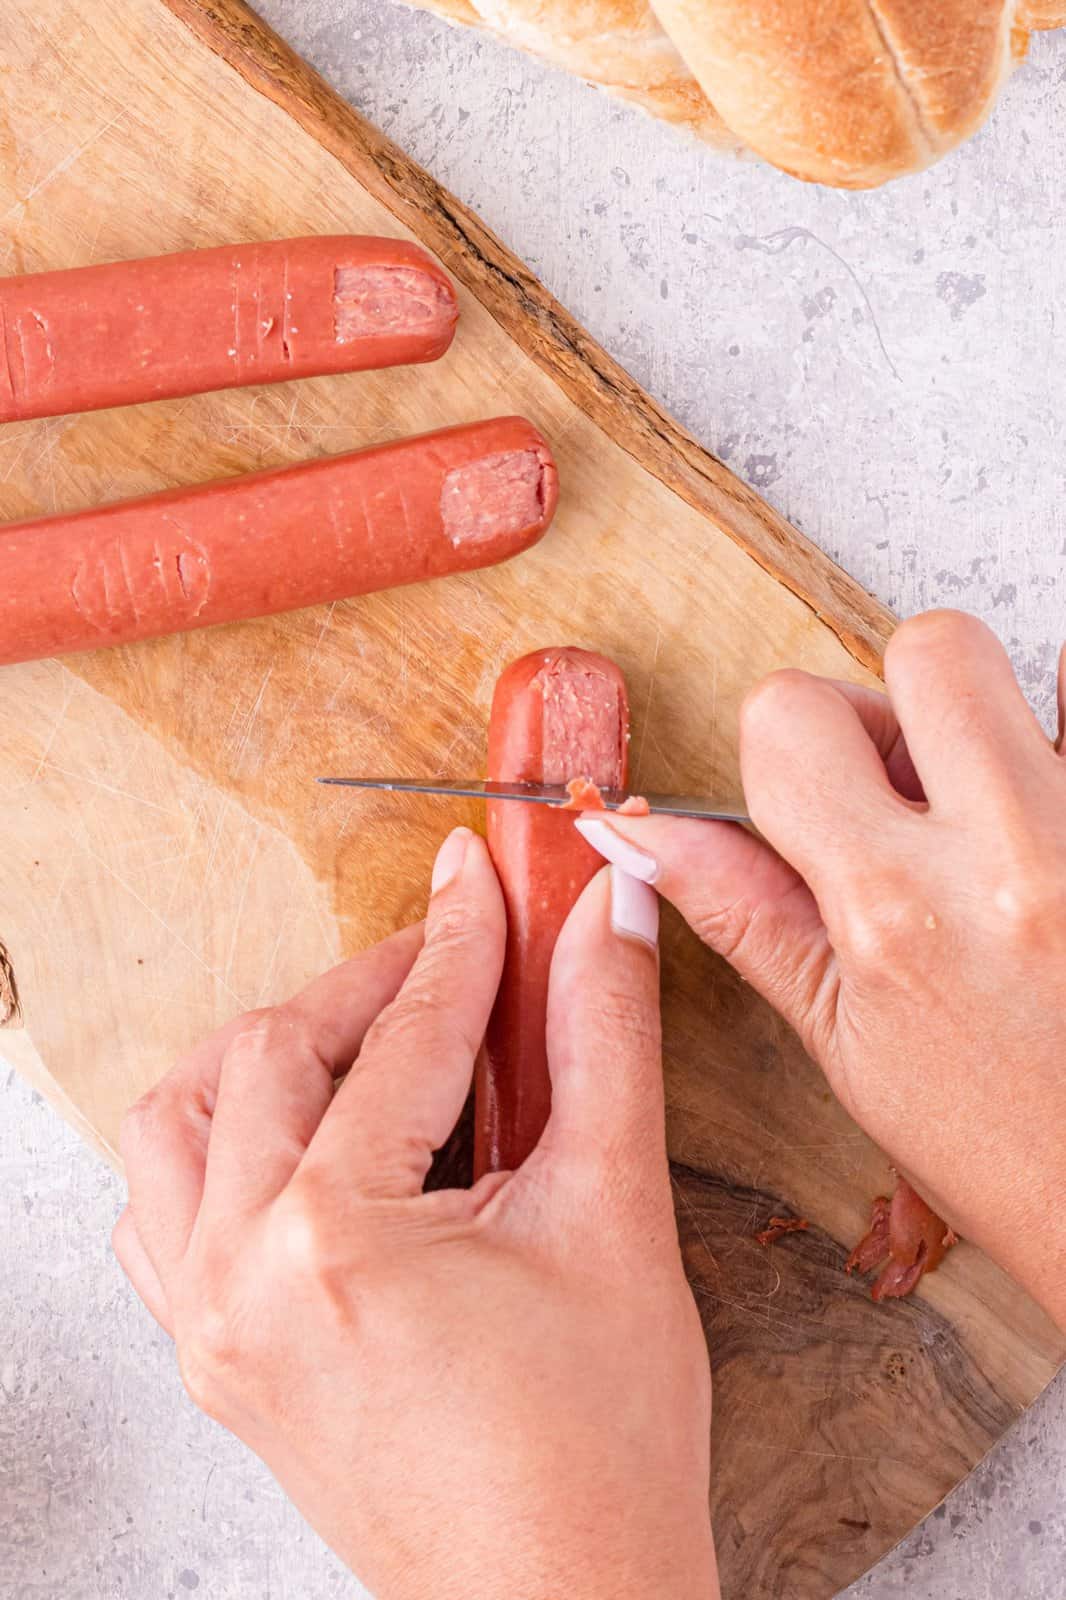 Knife scraping off a portion of the hot dog to make the fingernail.